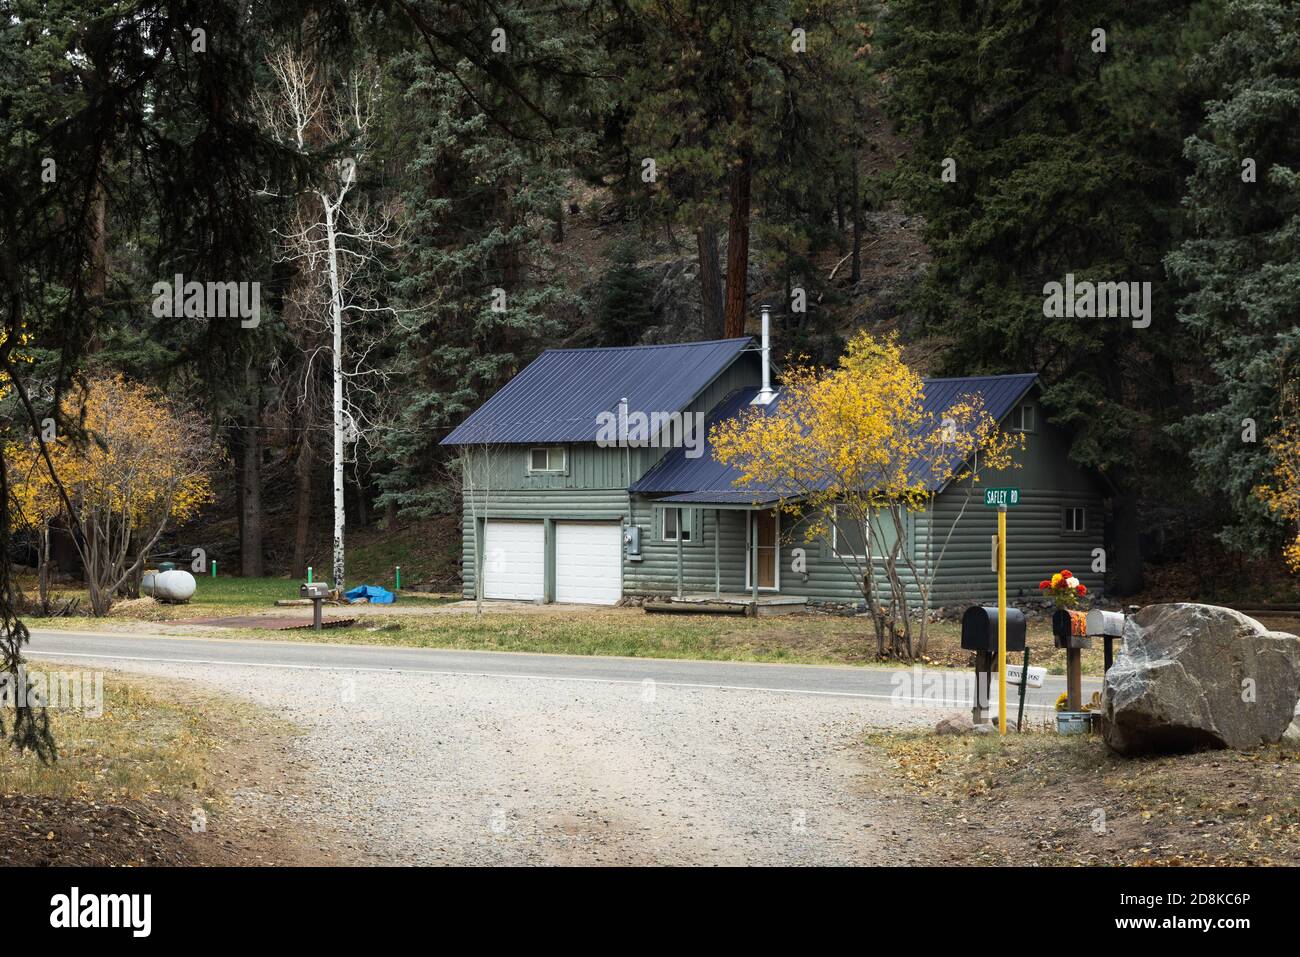 Mark Redwine's house in Vallecito, Colorado, Mark is the father of Dylan Redwine, who disappeared on a visit to this house on Thanksgiving holiday 2012. Mark was later arrested and his trial for murder begins in November 2020. A verdict is expected by December 12, 2020. Stock Photo